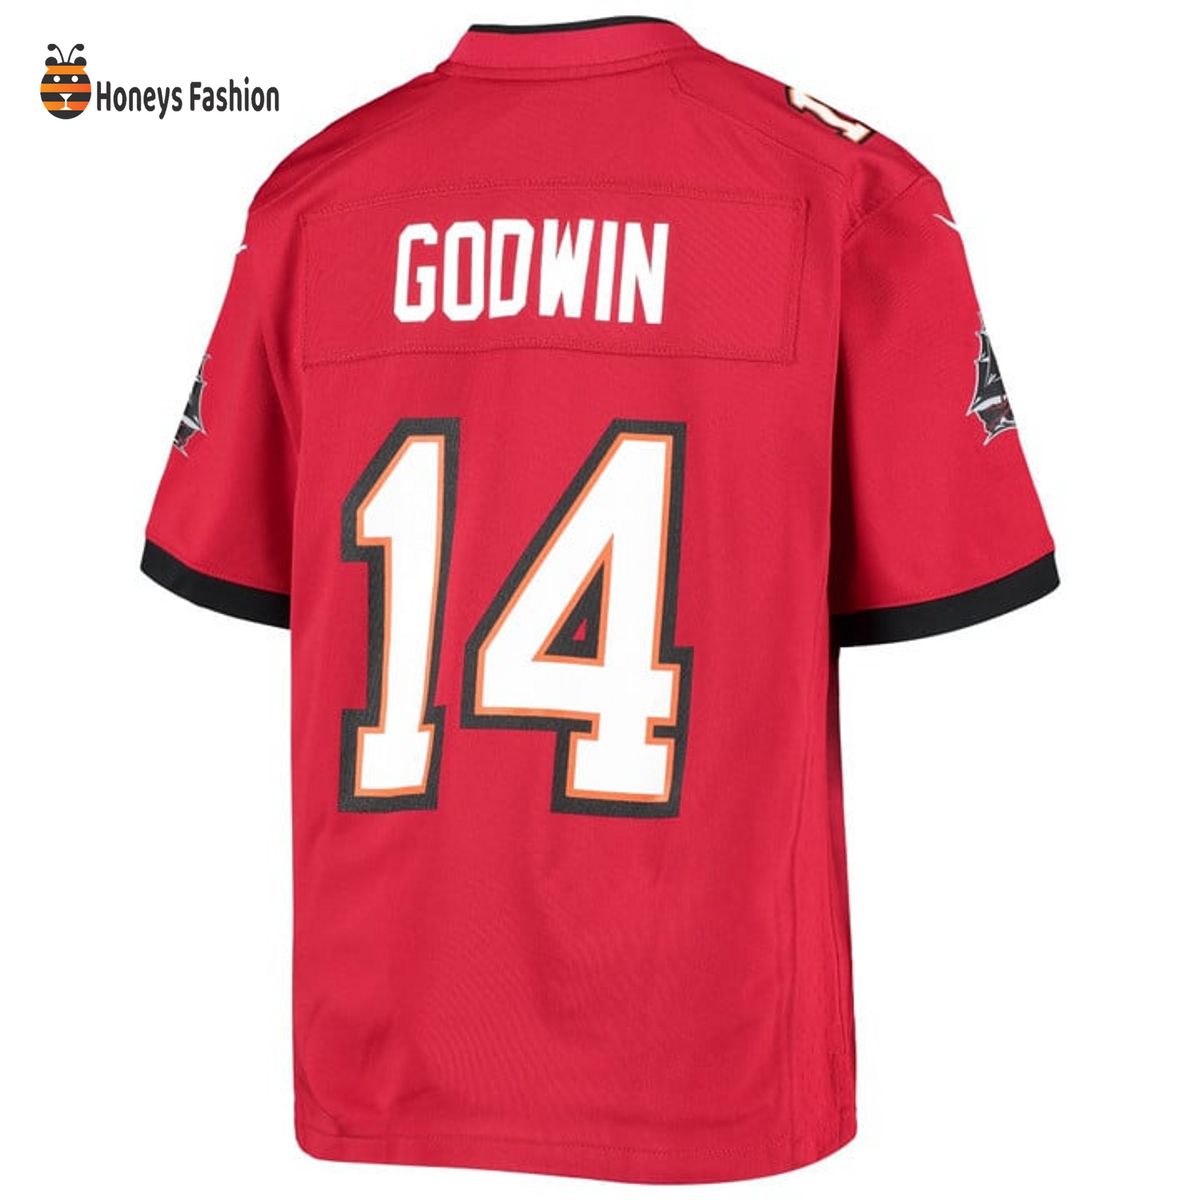 Chris Godwin Tampa Bay Buccaneers Nike Youth Team Red Game Jersey